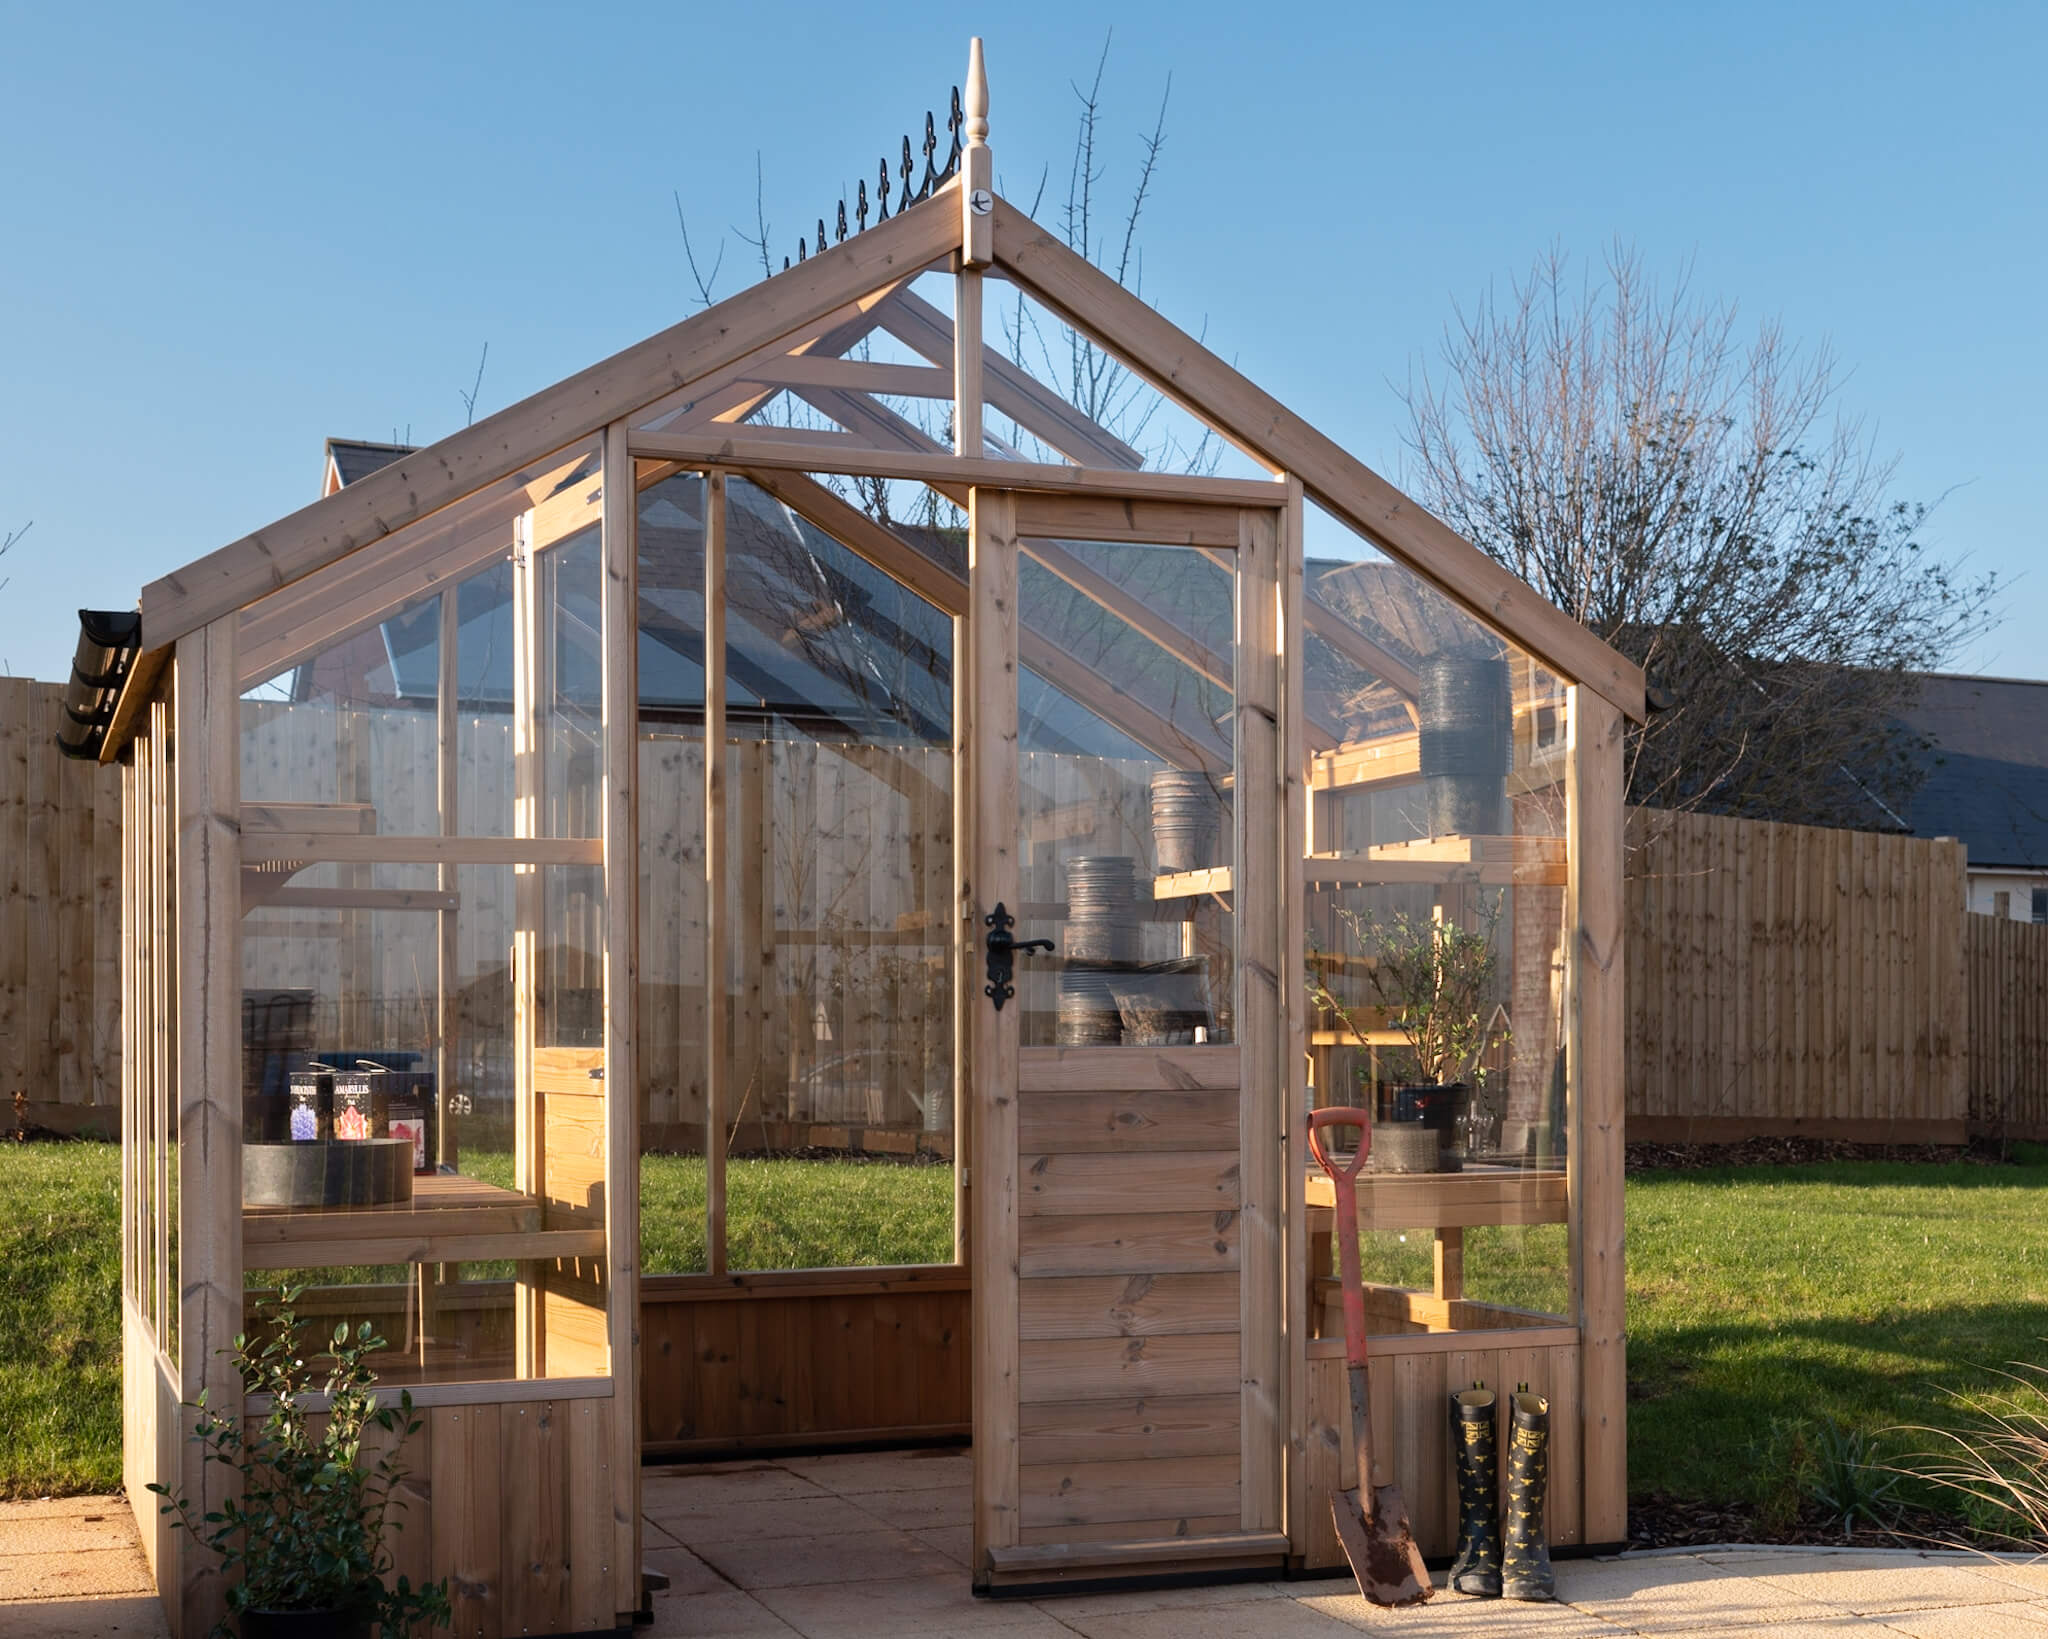 A wooden greenhouse. Bright clear blue skies.